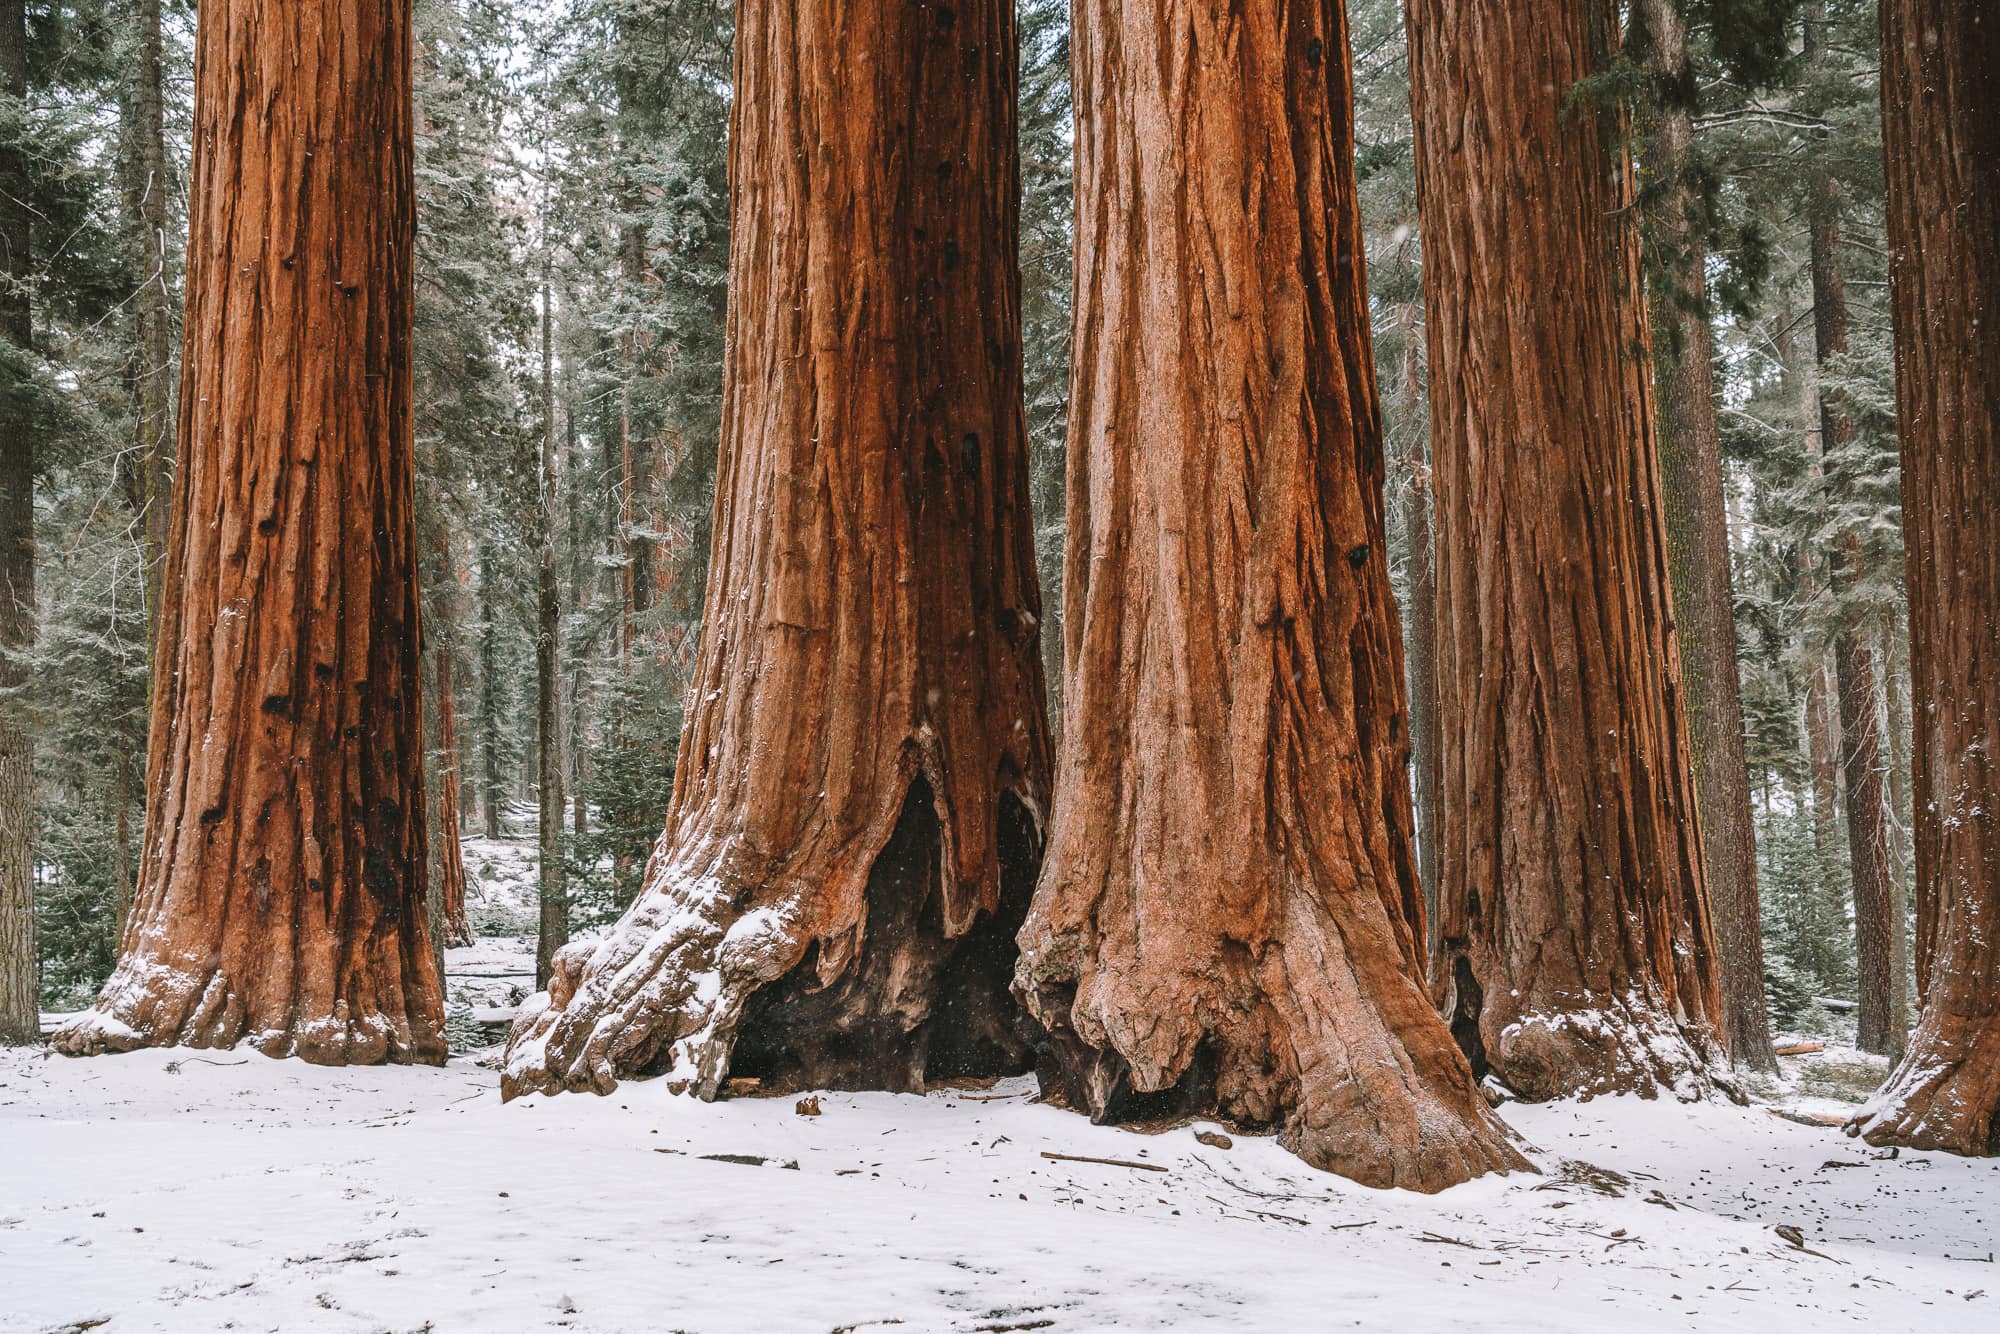 Parker Group Sequoias in Sequoia National Park during winter